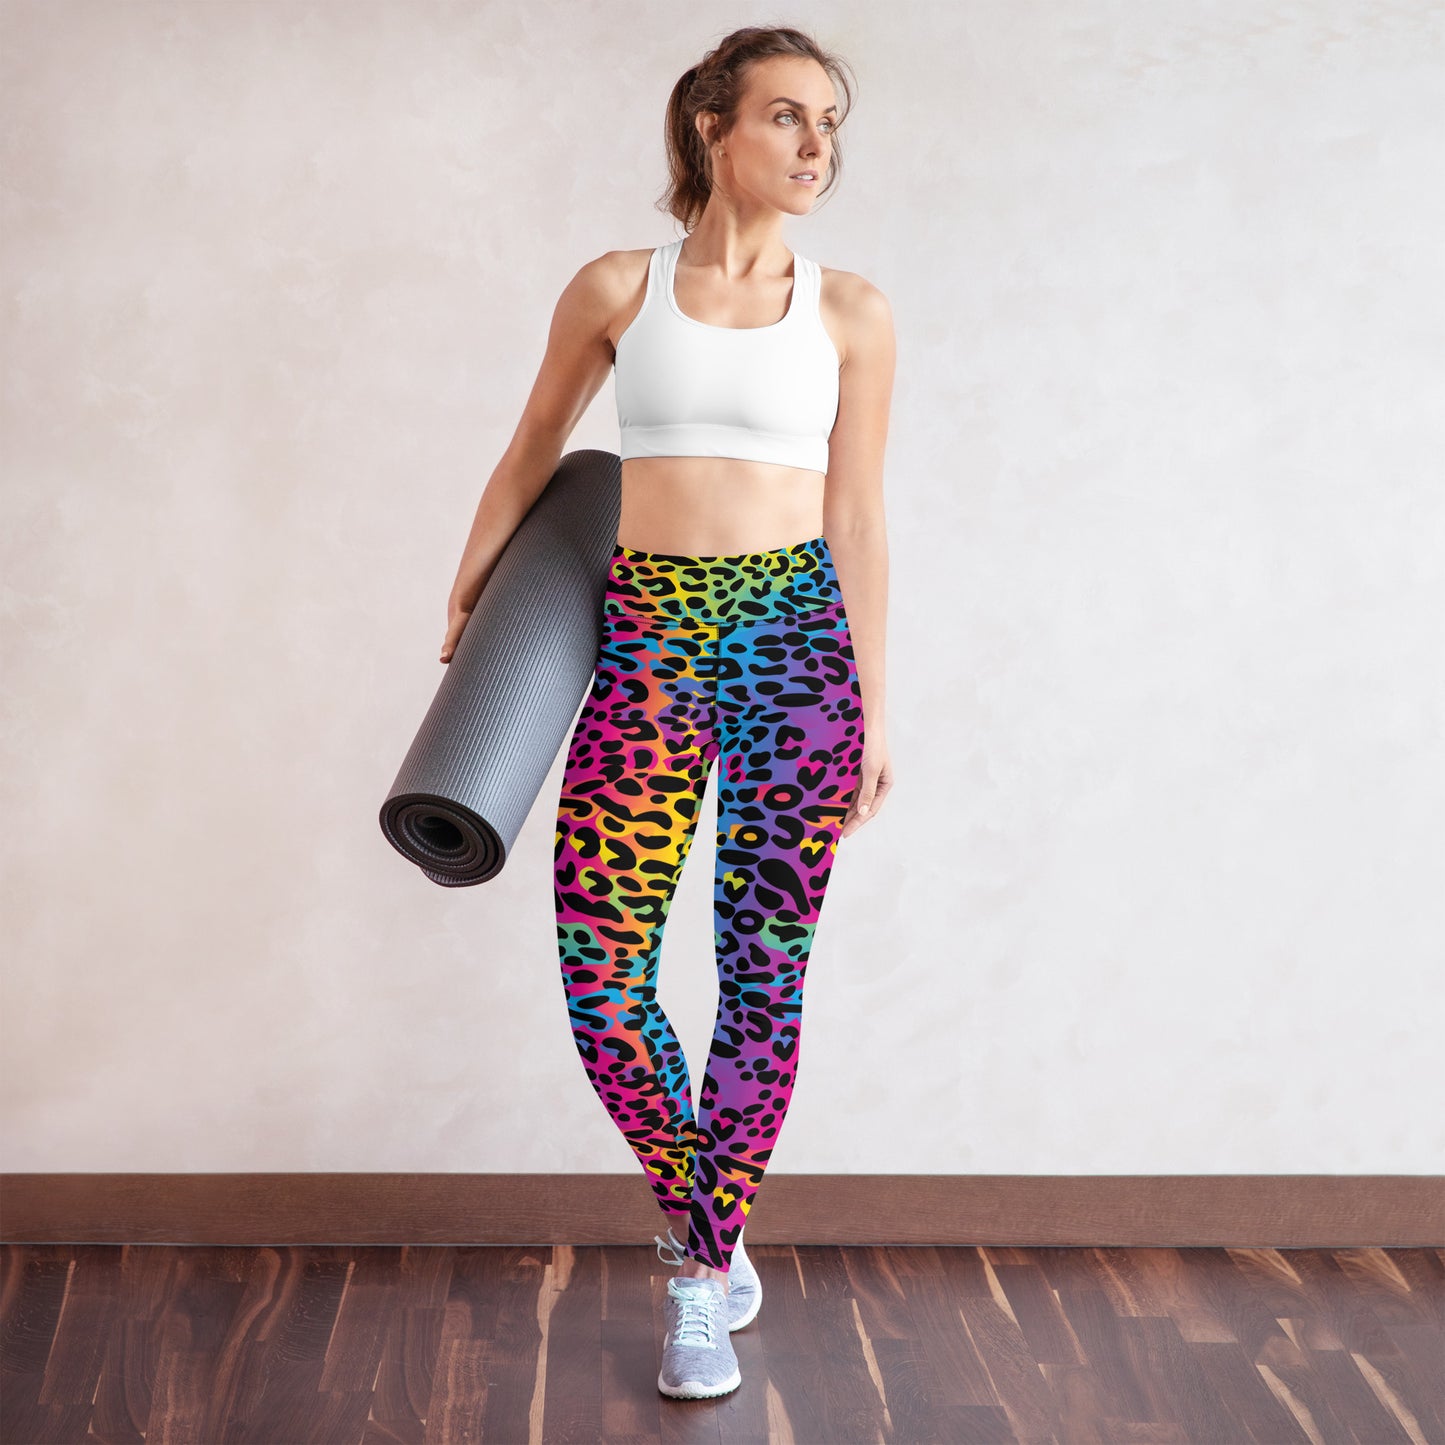 Rainbow Leopard Yoga Leggings Women, Colorful Gradient Animal Print High Waisted Pants Cute Workout Gym Designer Tights Starcove Fashion